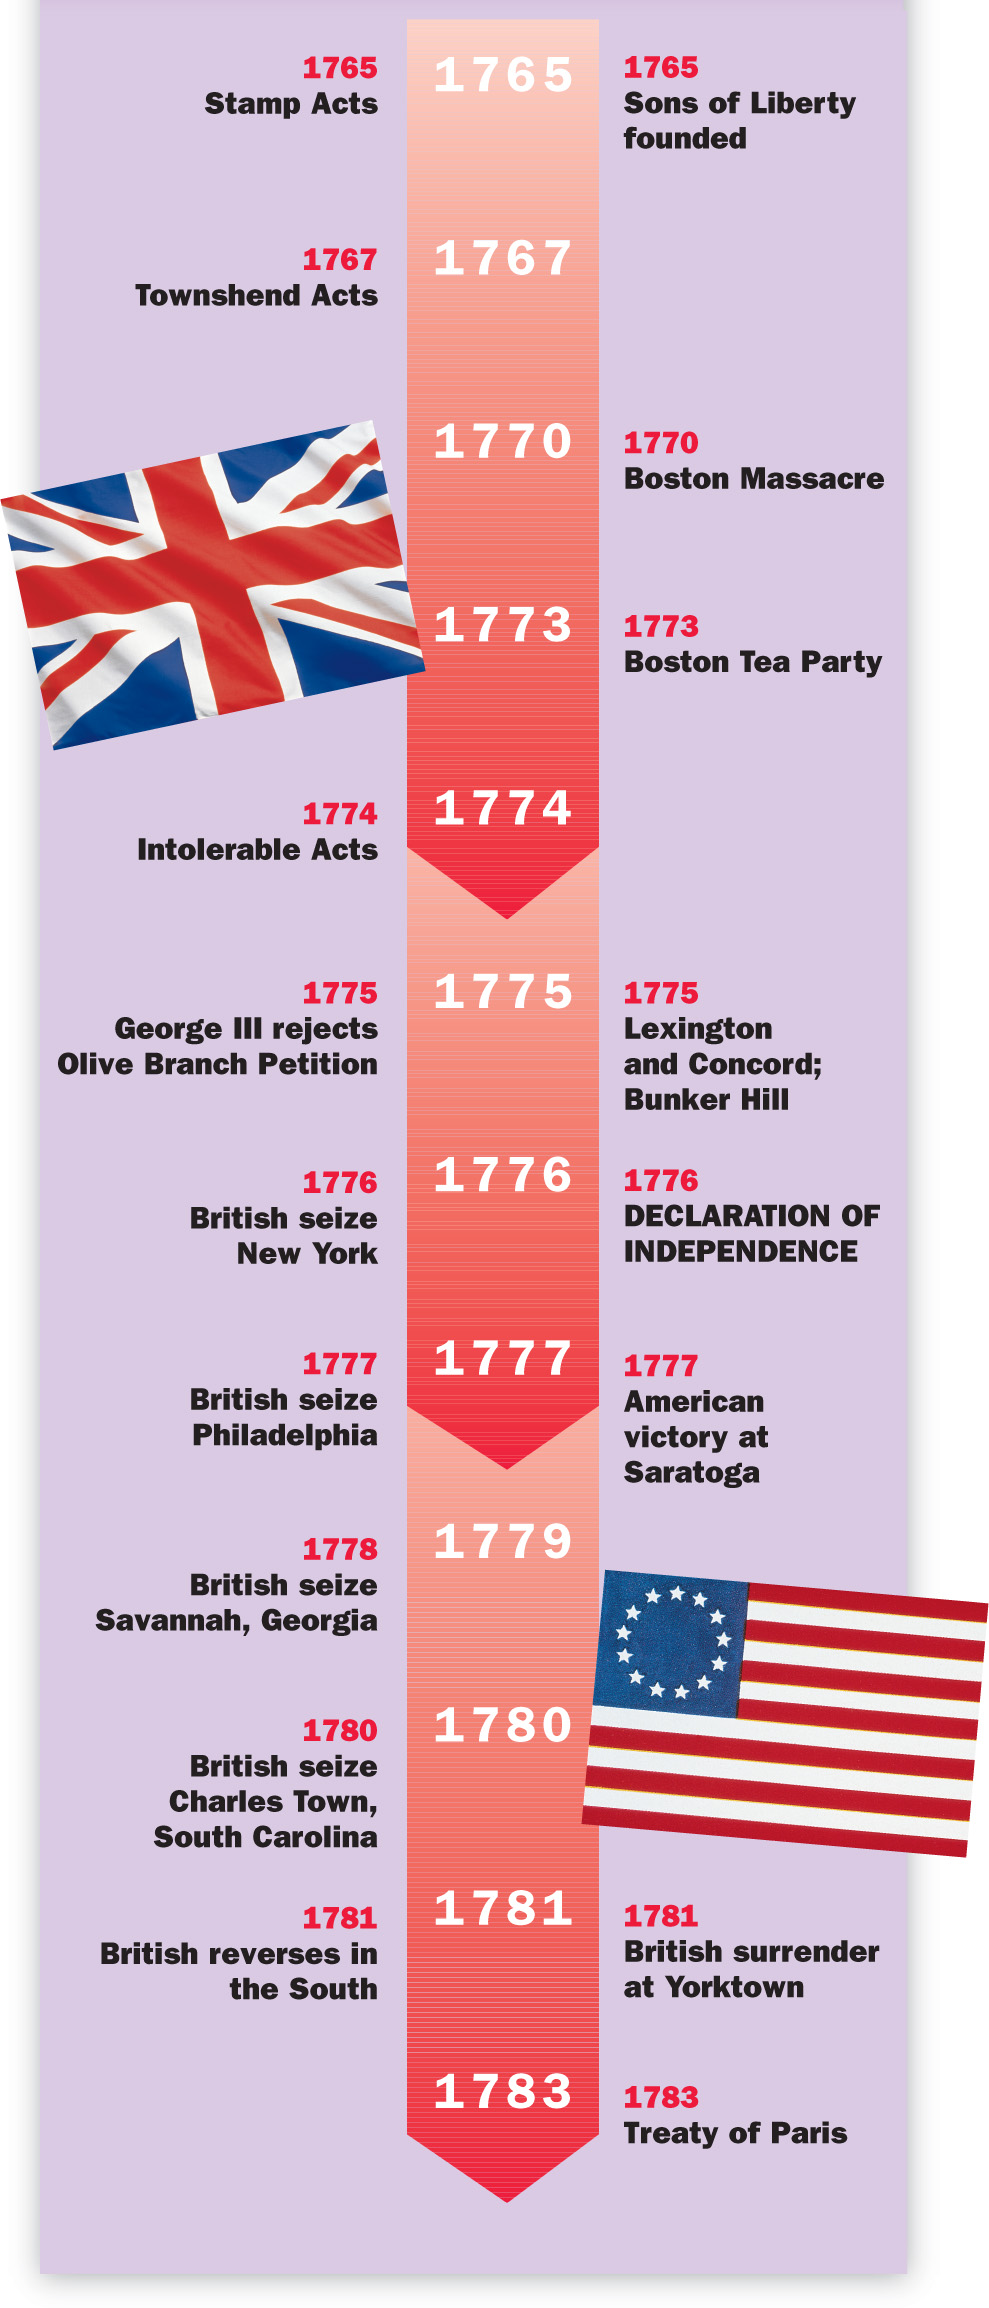 A timeline of events in Britain and the U.S. from 1765 to 1783.